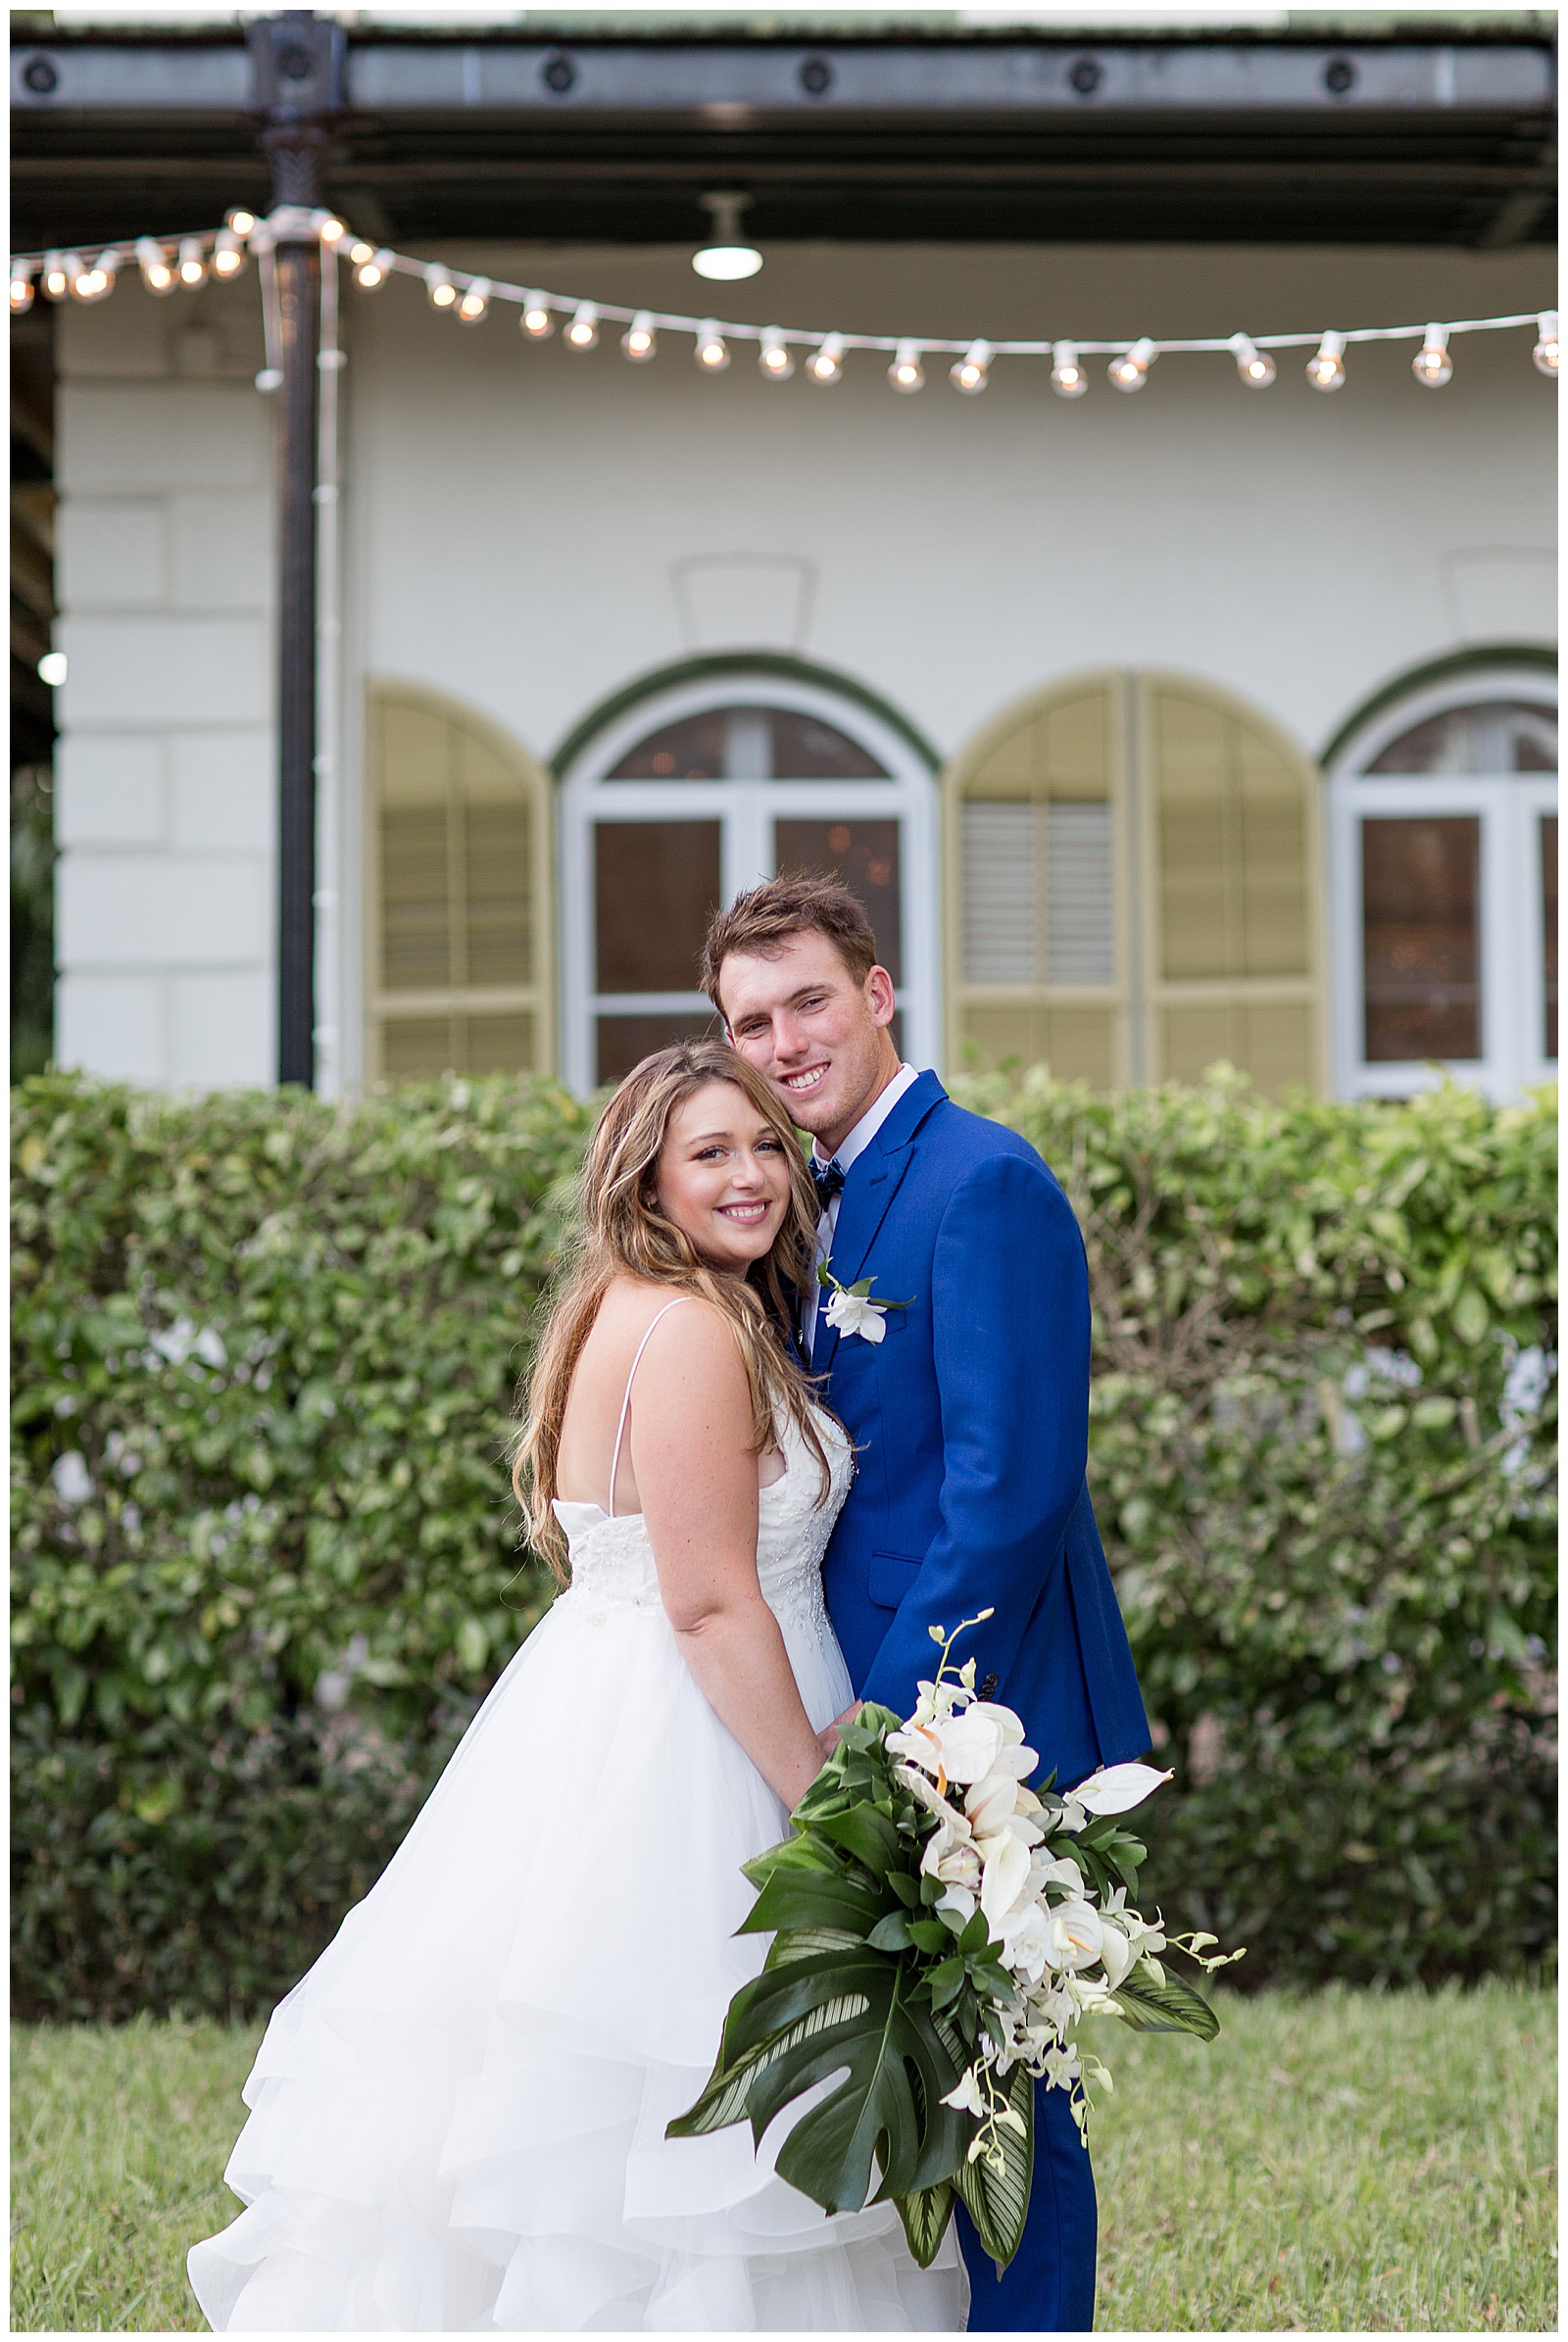 bride and groom hugging on lawn by hedge row and smiling as bride holds bouquet at hemingway house